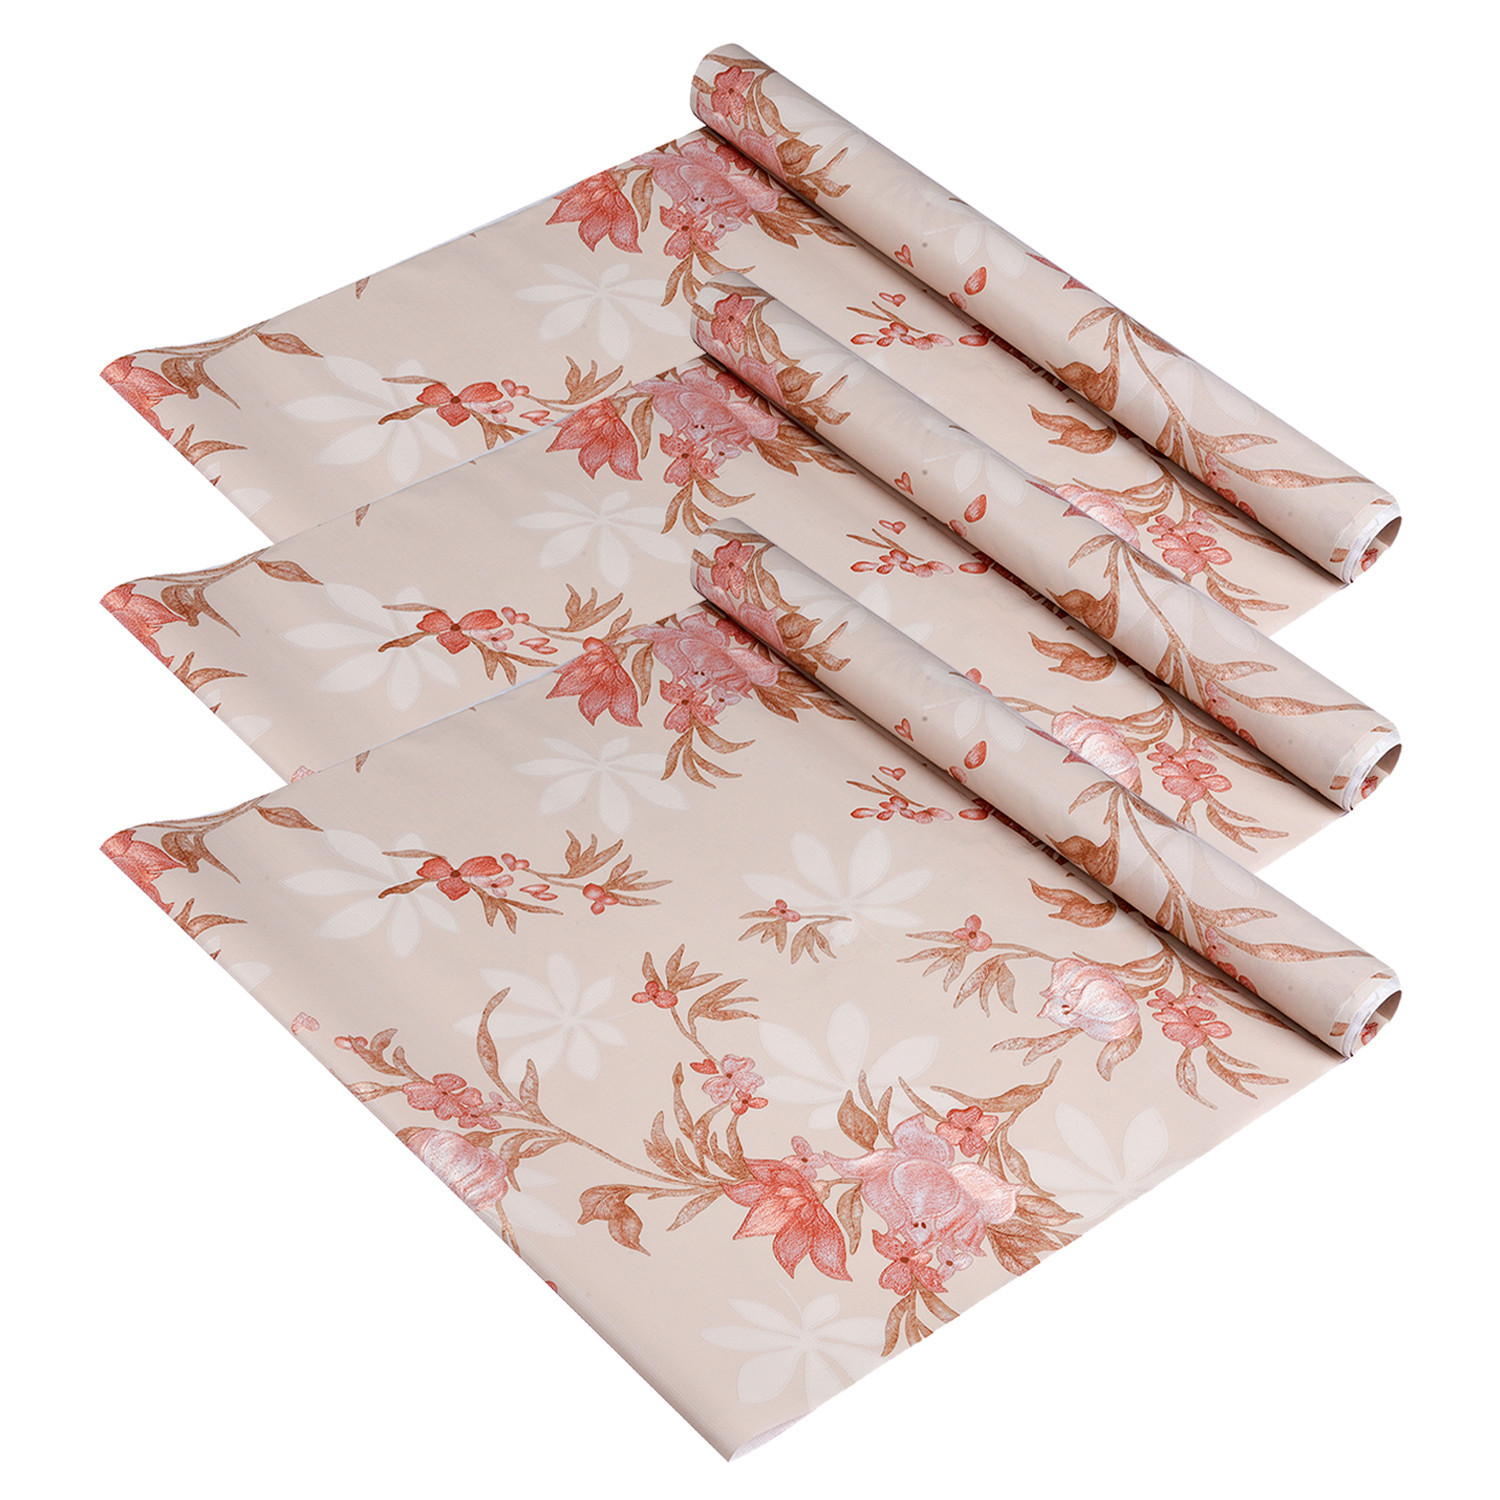 Kuber Industries Shelf Liner | Kitchen Cabinet Shelf Protector | Kitchen Liners for Cabinets and Drawers | Drawer Liner Mat | Red Flower Shelf Liner Roll | Cabinet Mat | 3 MTR | Cream